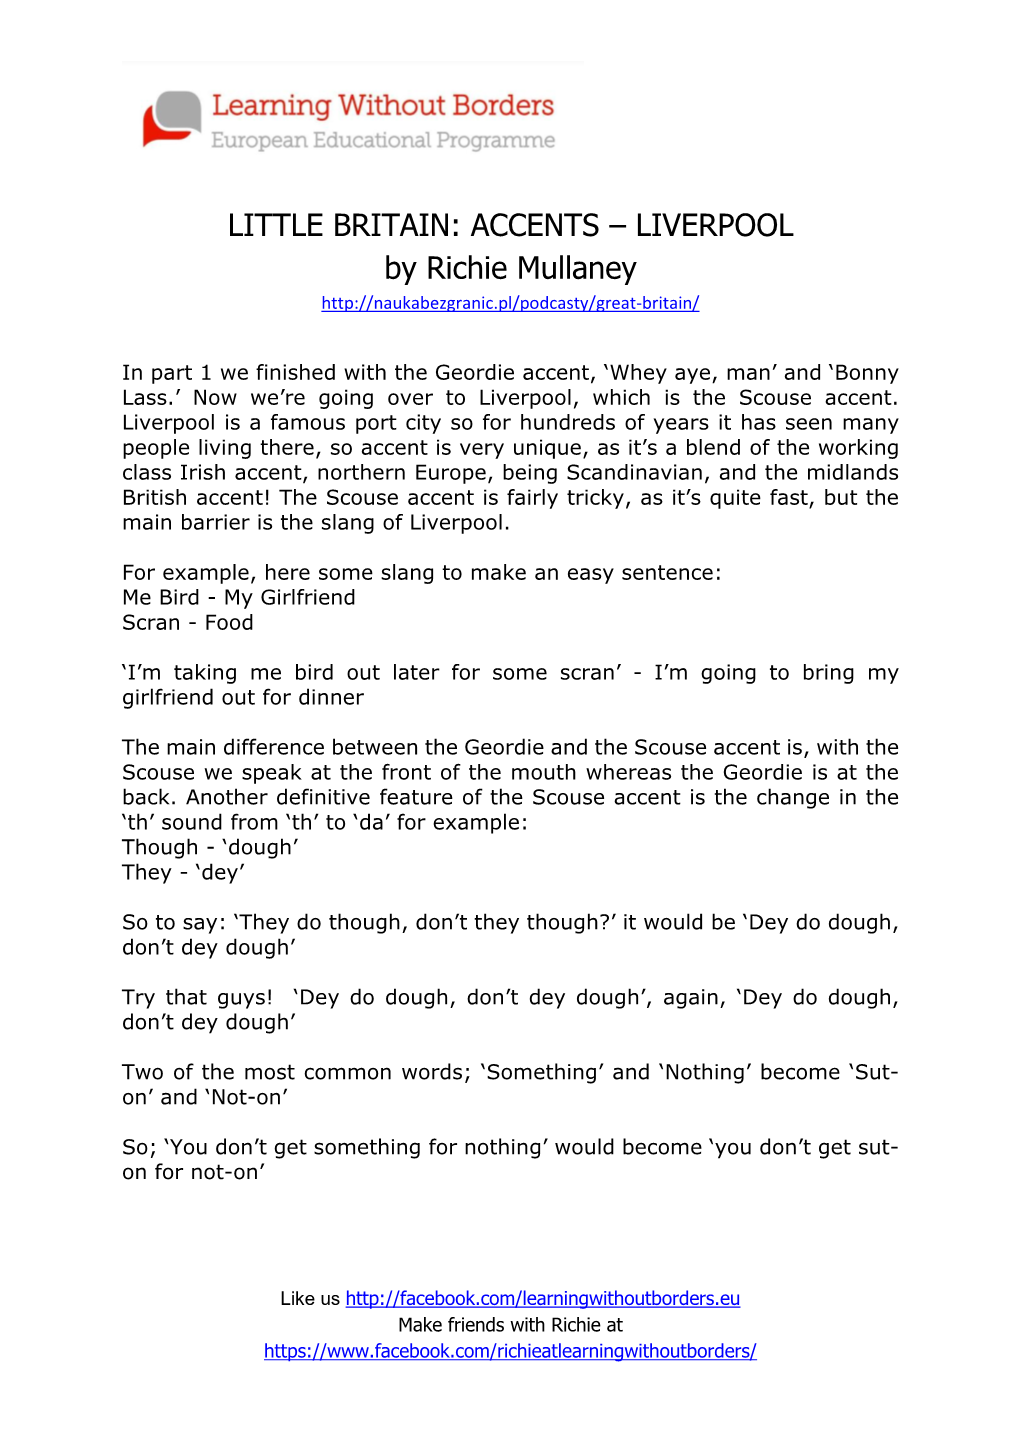 LITTLE BRITAIN: ACCENTS – LIVERPOOL by Richie Mullaney